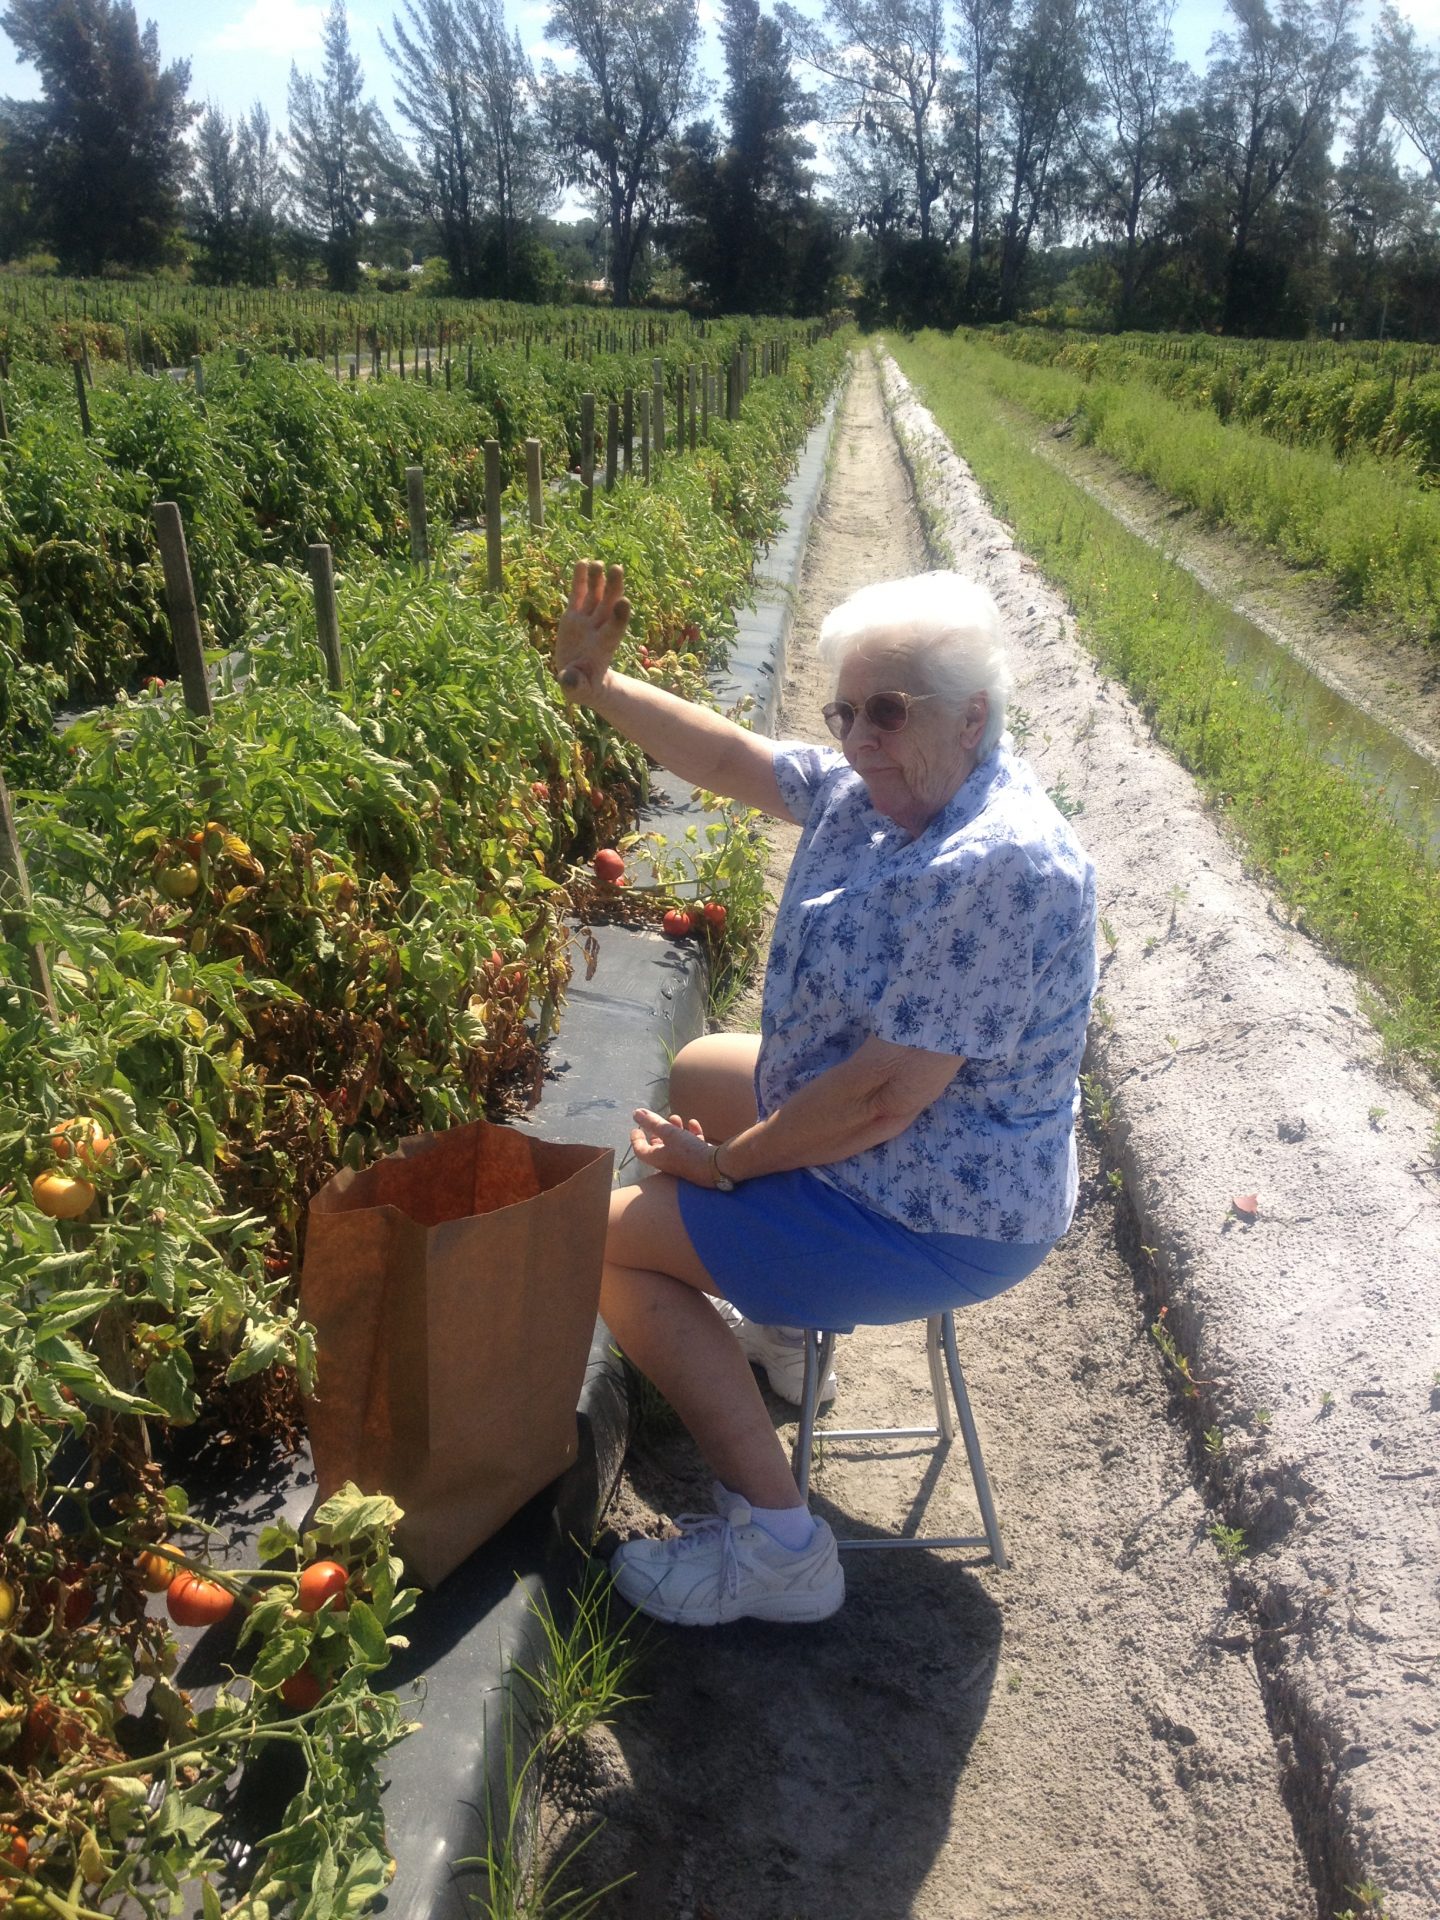 Picking tomatoes with Mama Mary